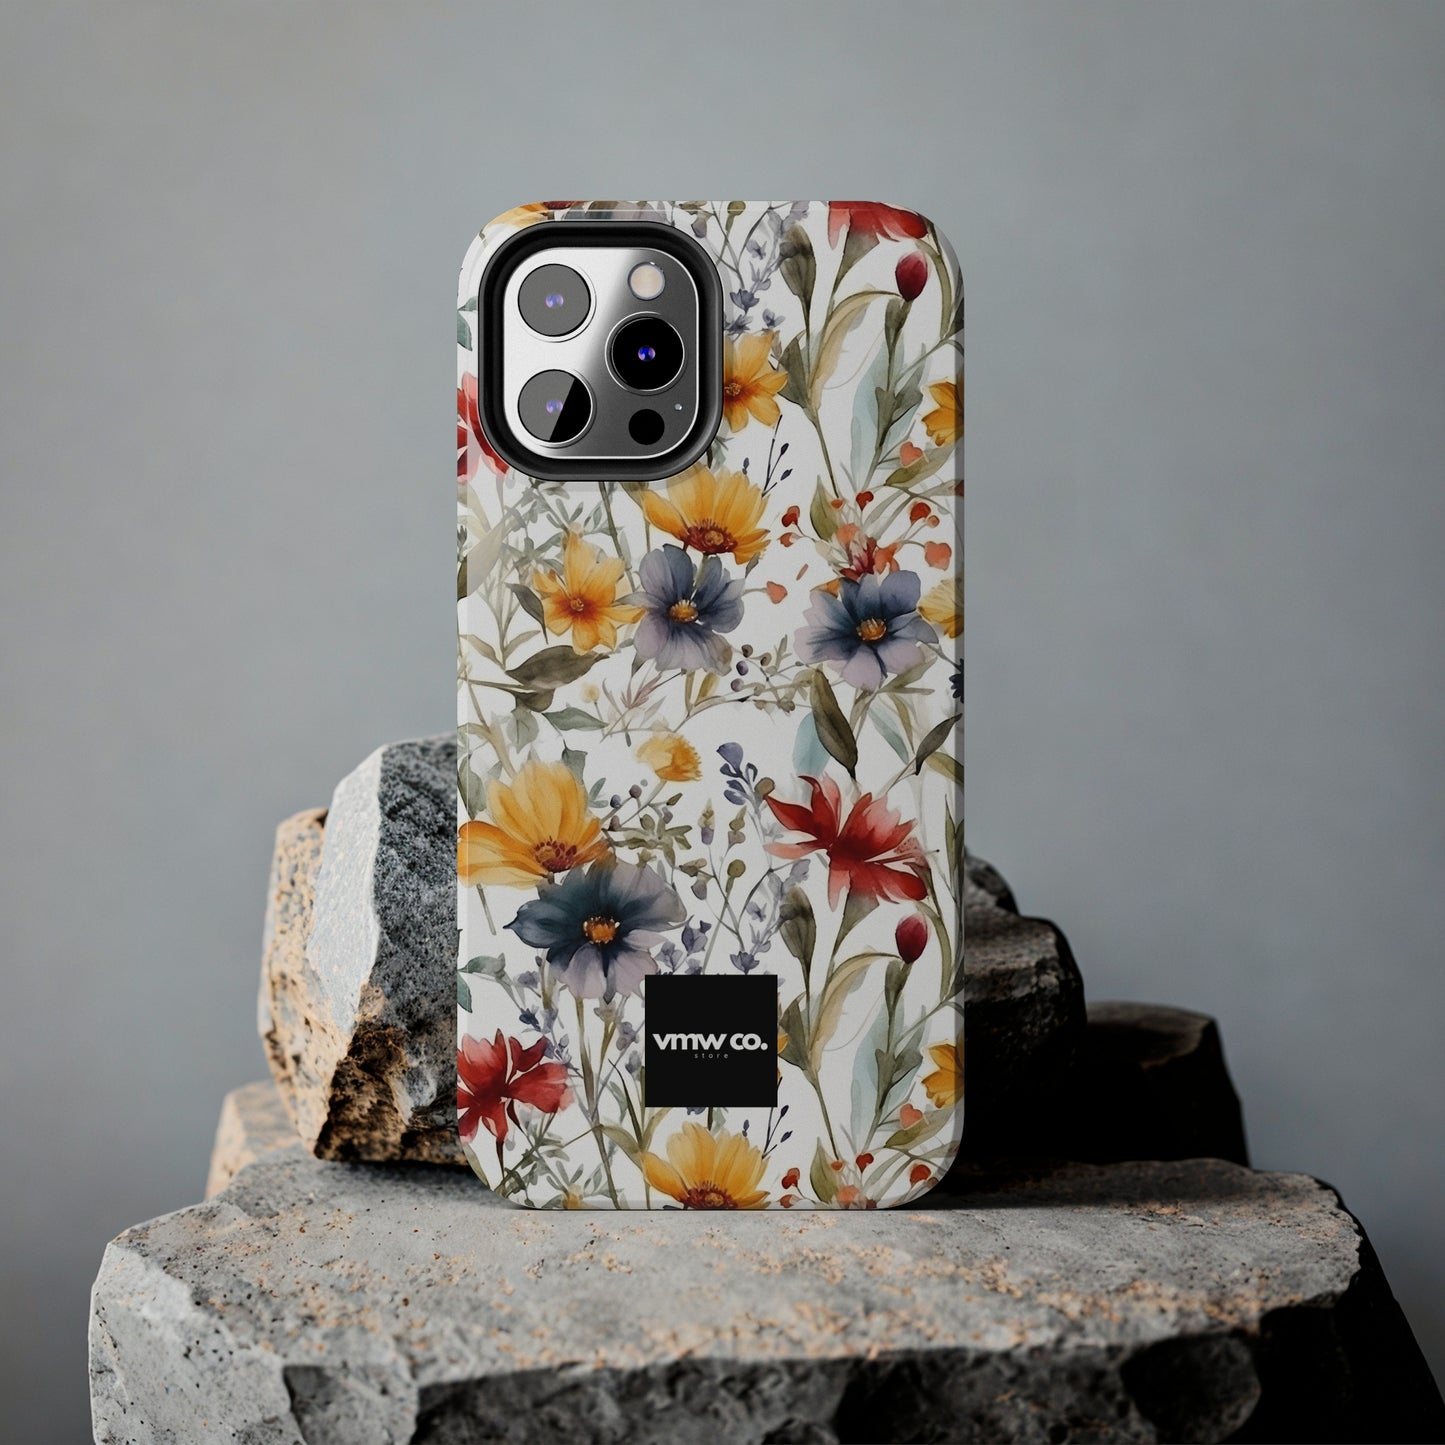 Meadow Medley iPhone Tough Phone Cases